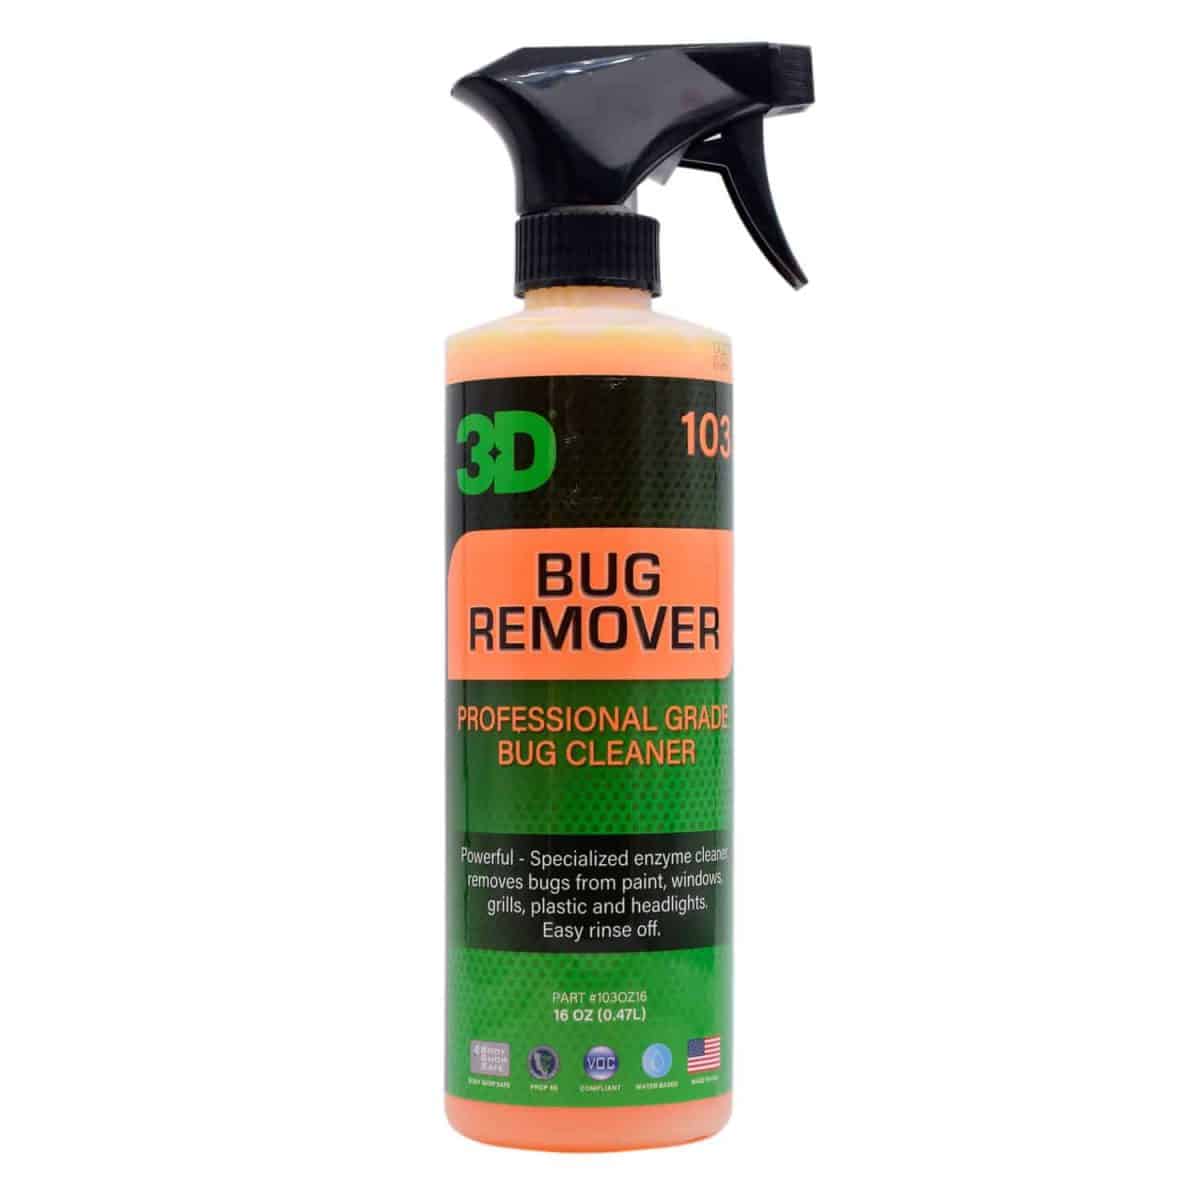 BUG REMOVER 3D